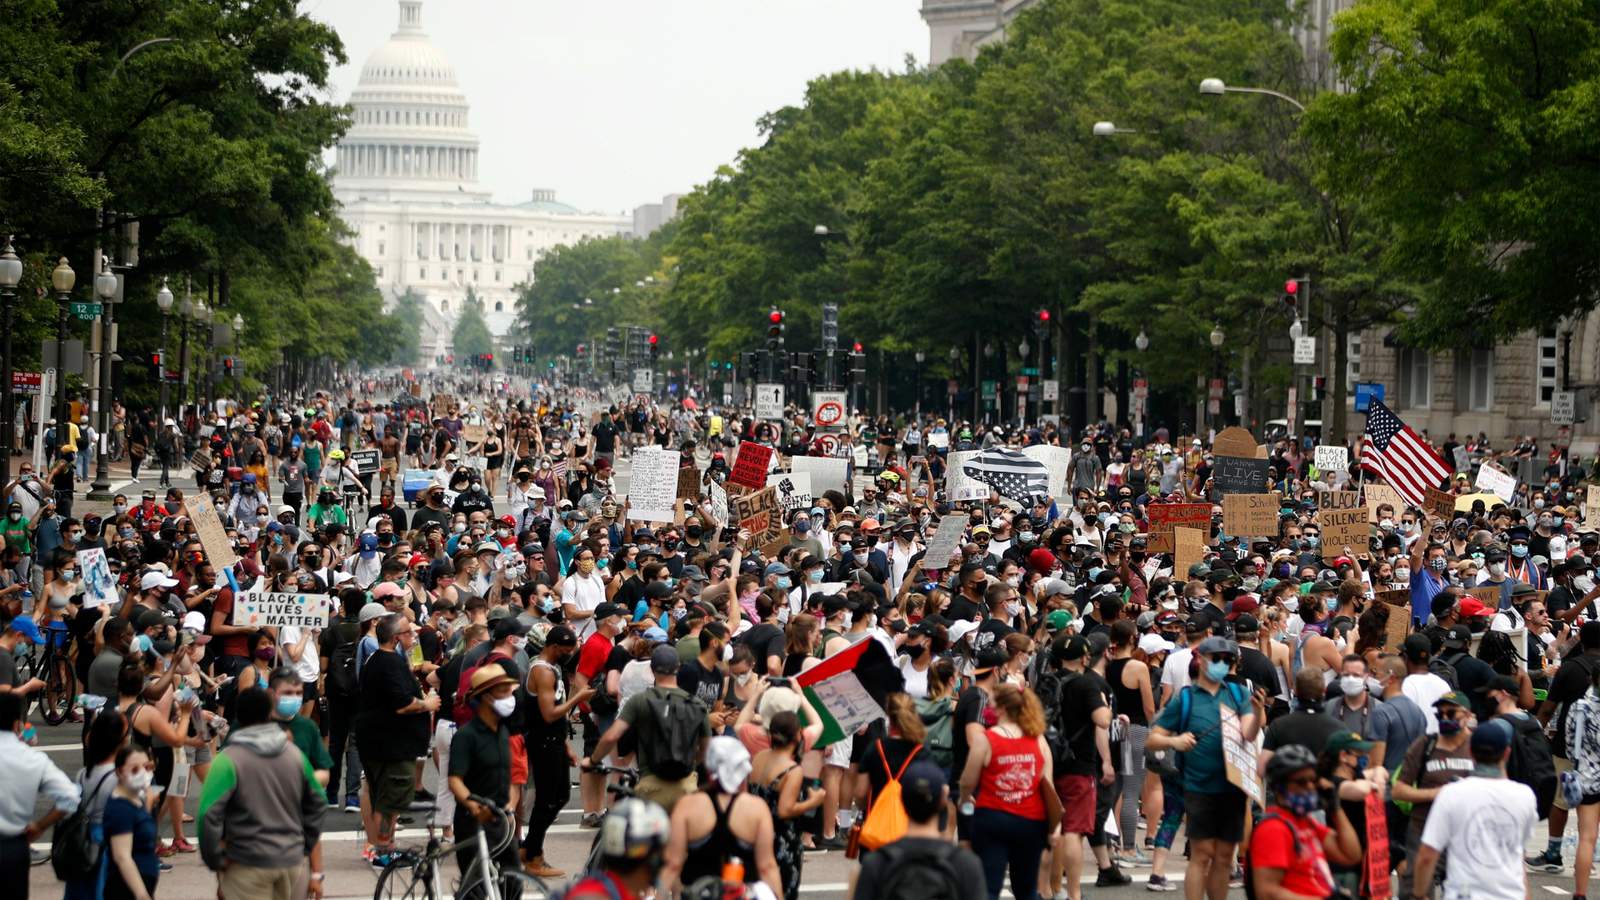 Protesting is part of American history, these historic demonstrations led to changes in US policy